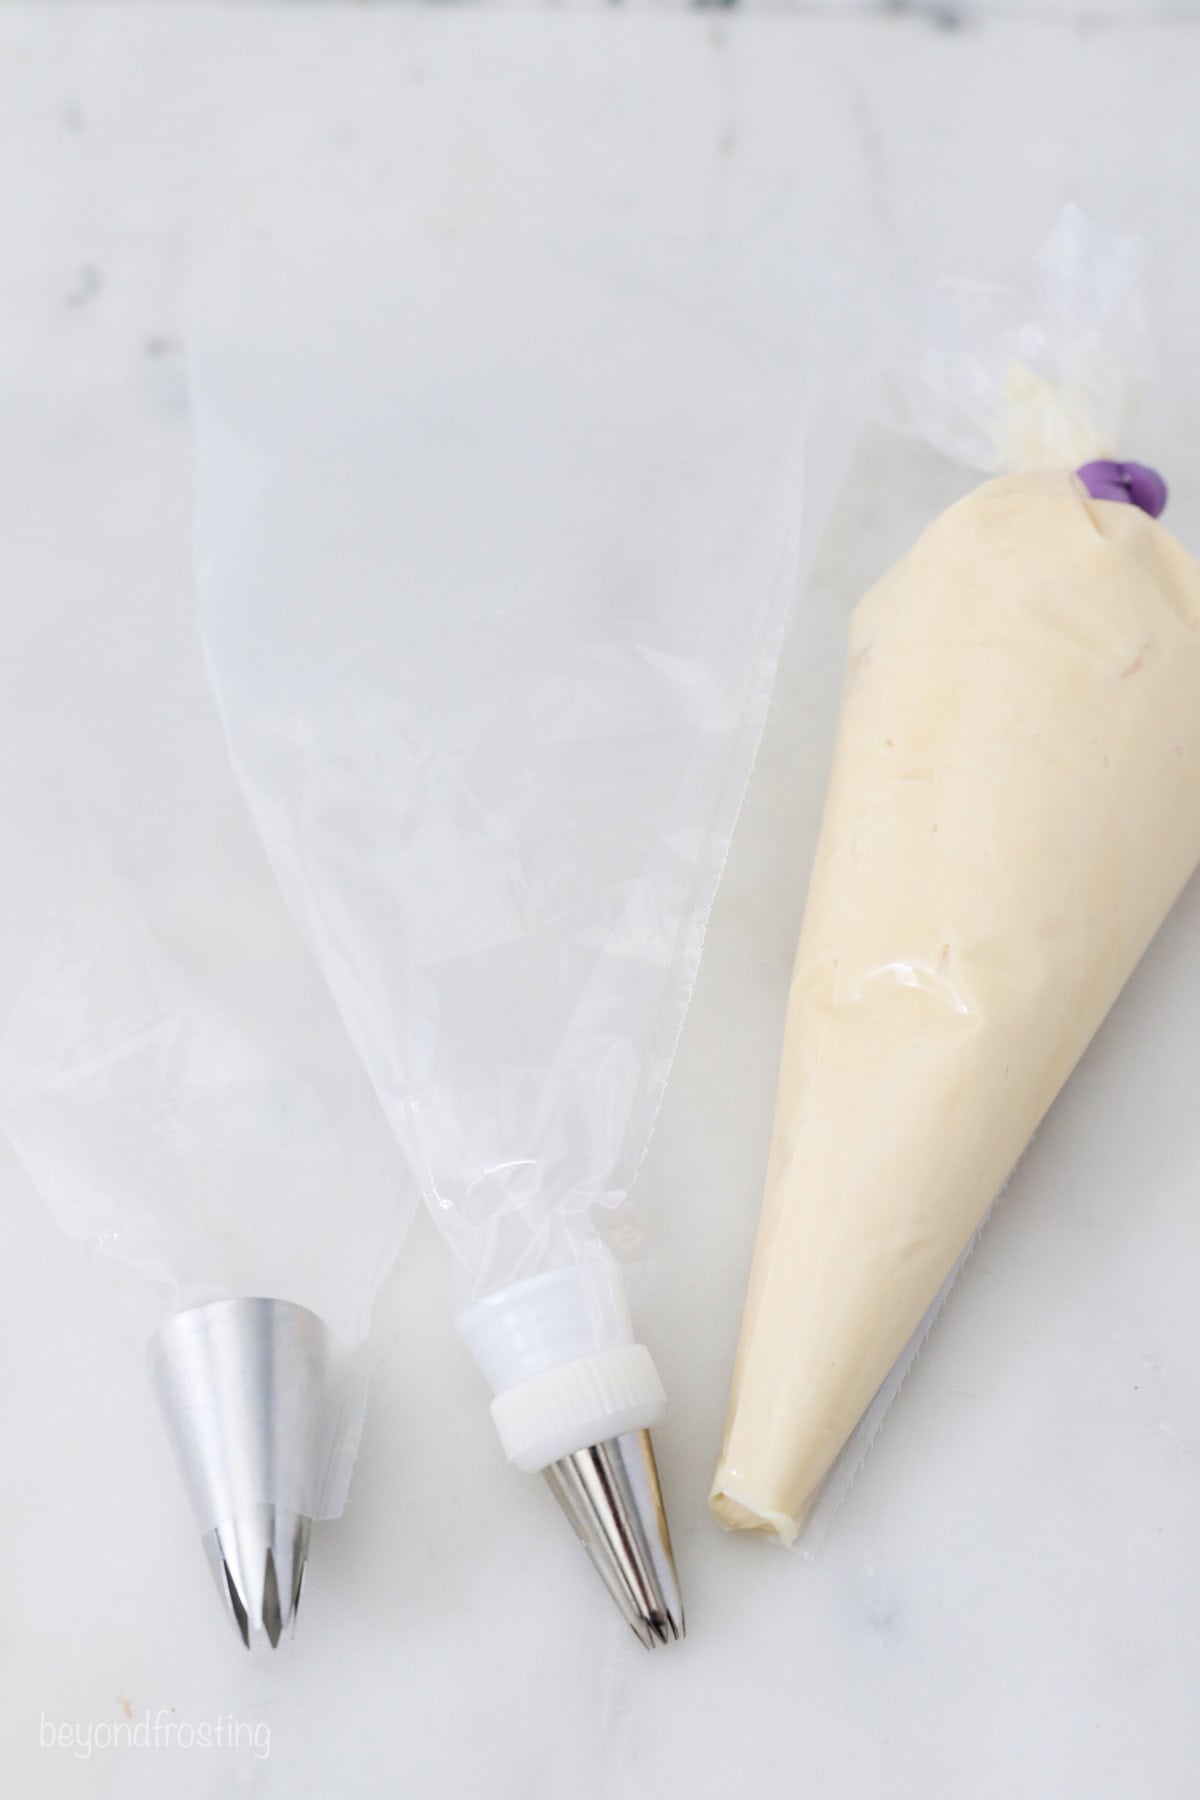 A piping tip resting next to an empty piping bag and a second piping bag filled with frosting.